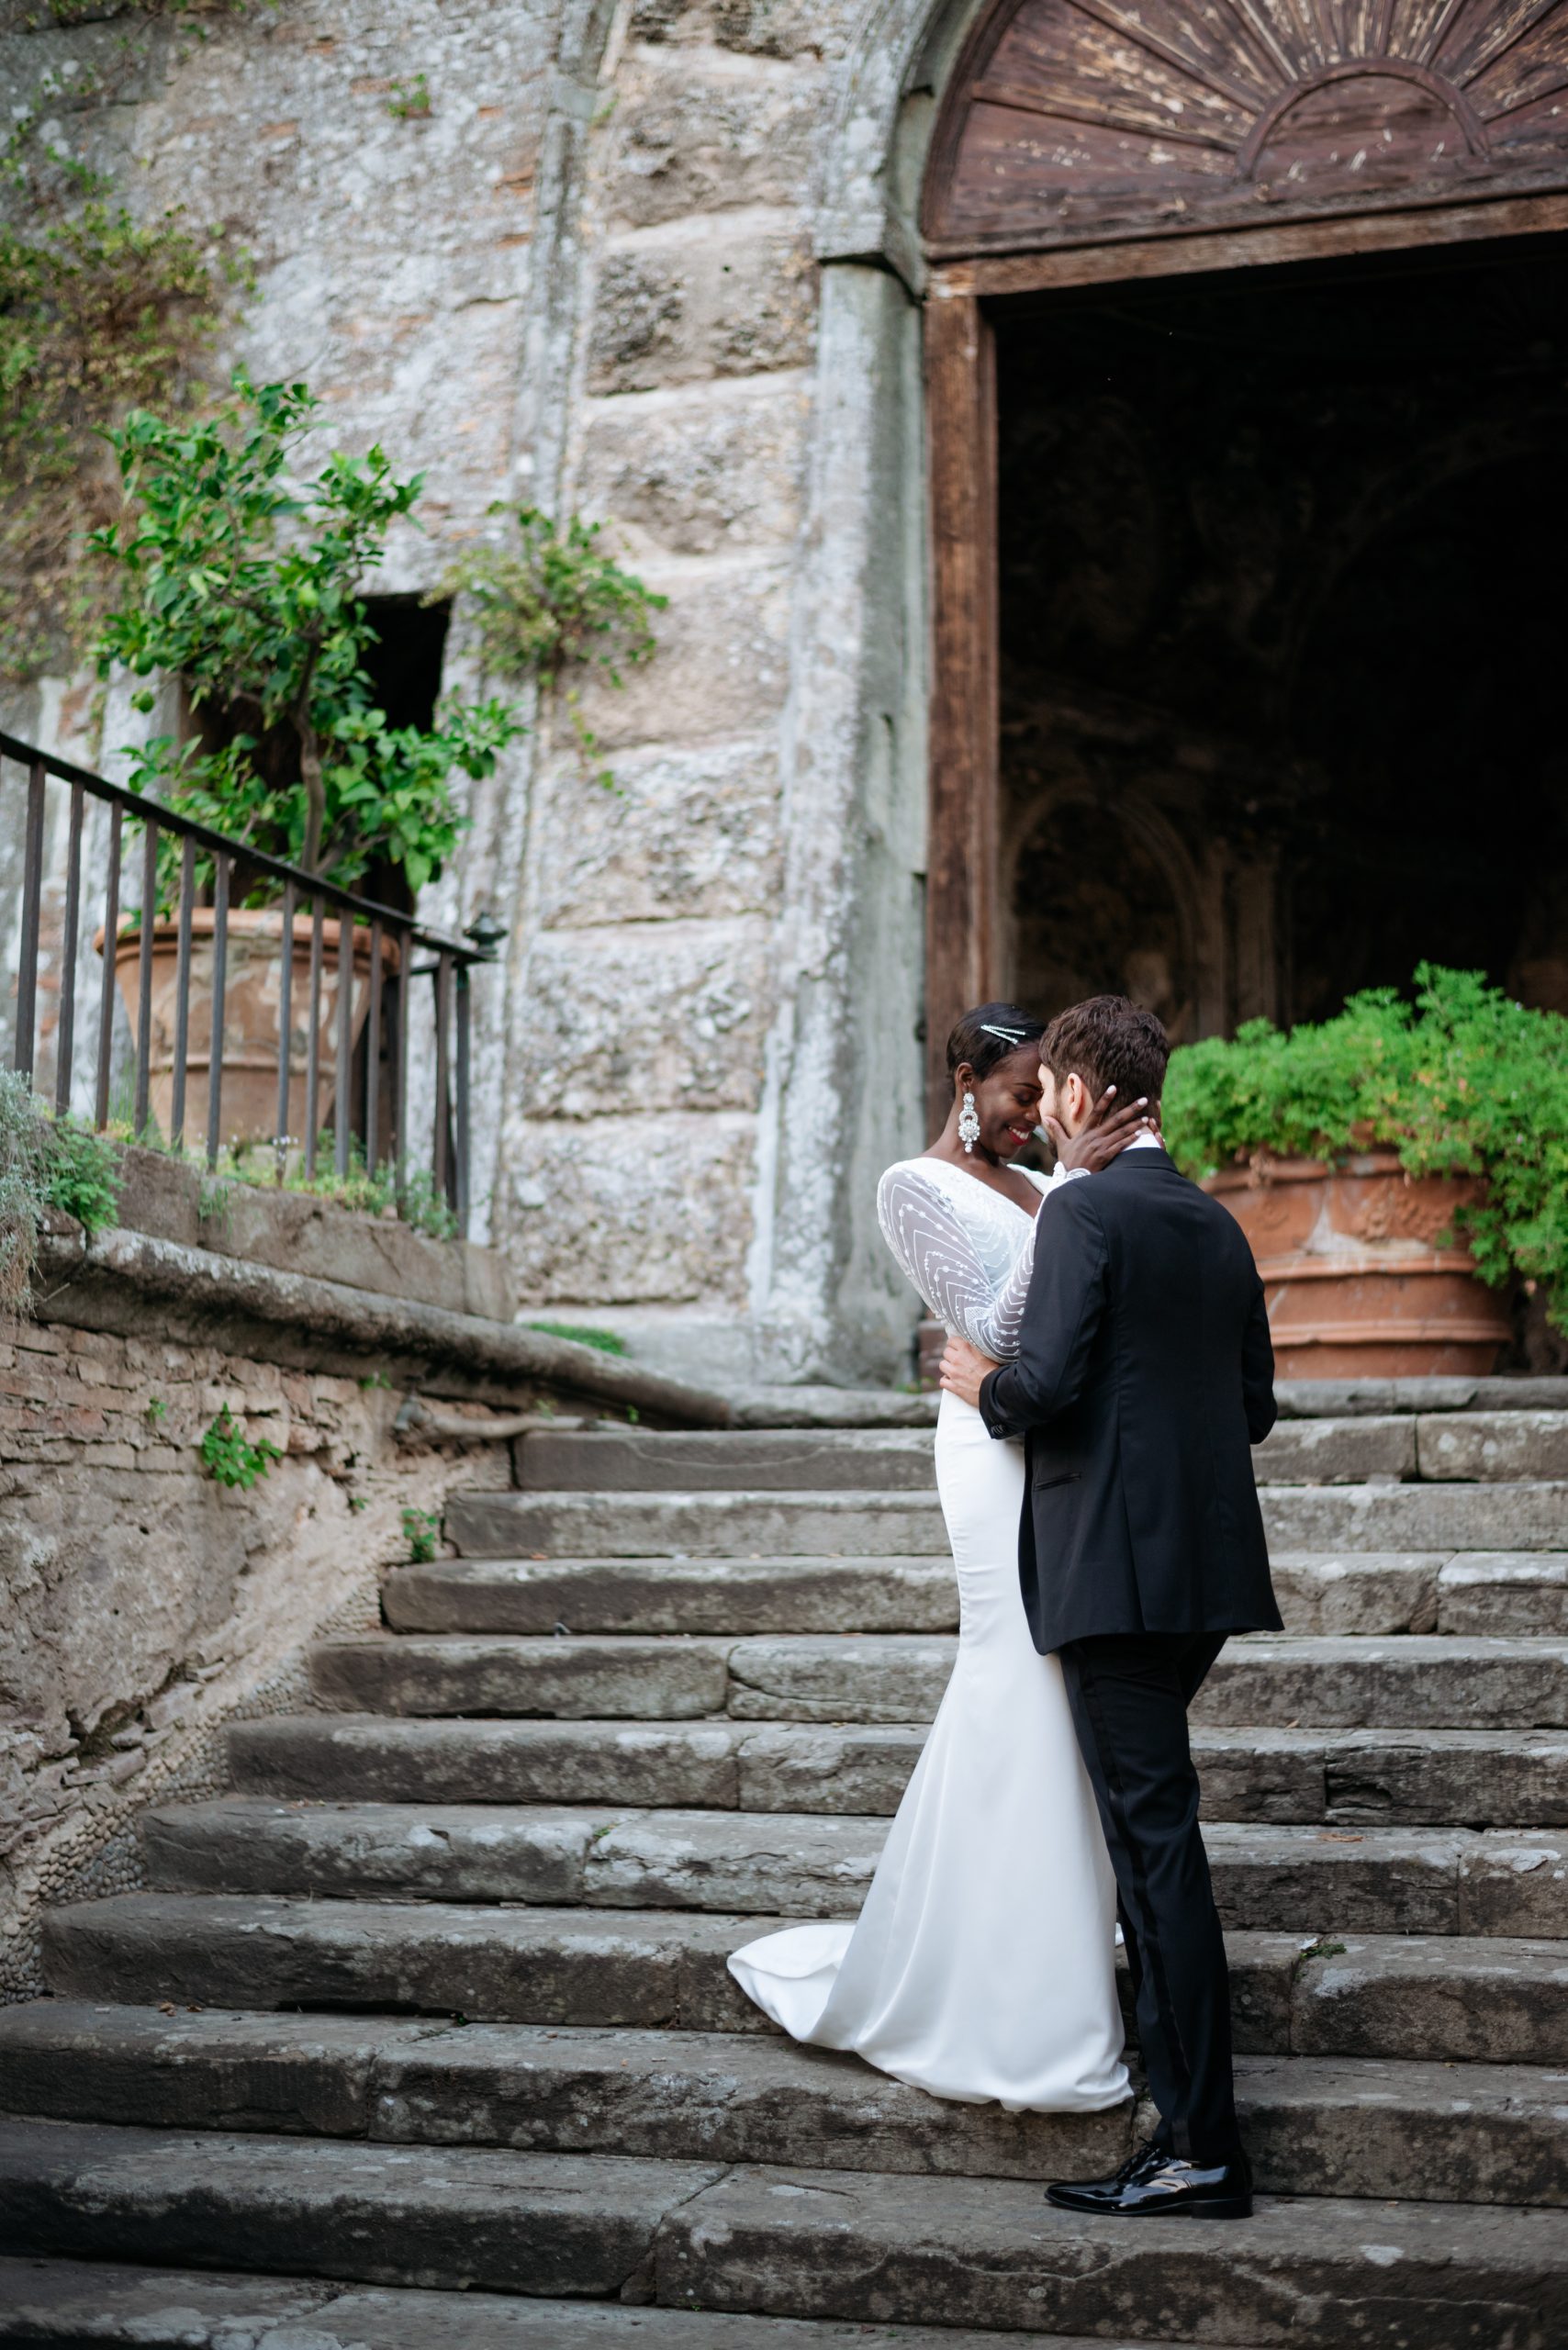 A bride and groom kissing on the steps of an old building.